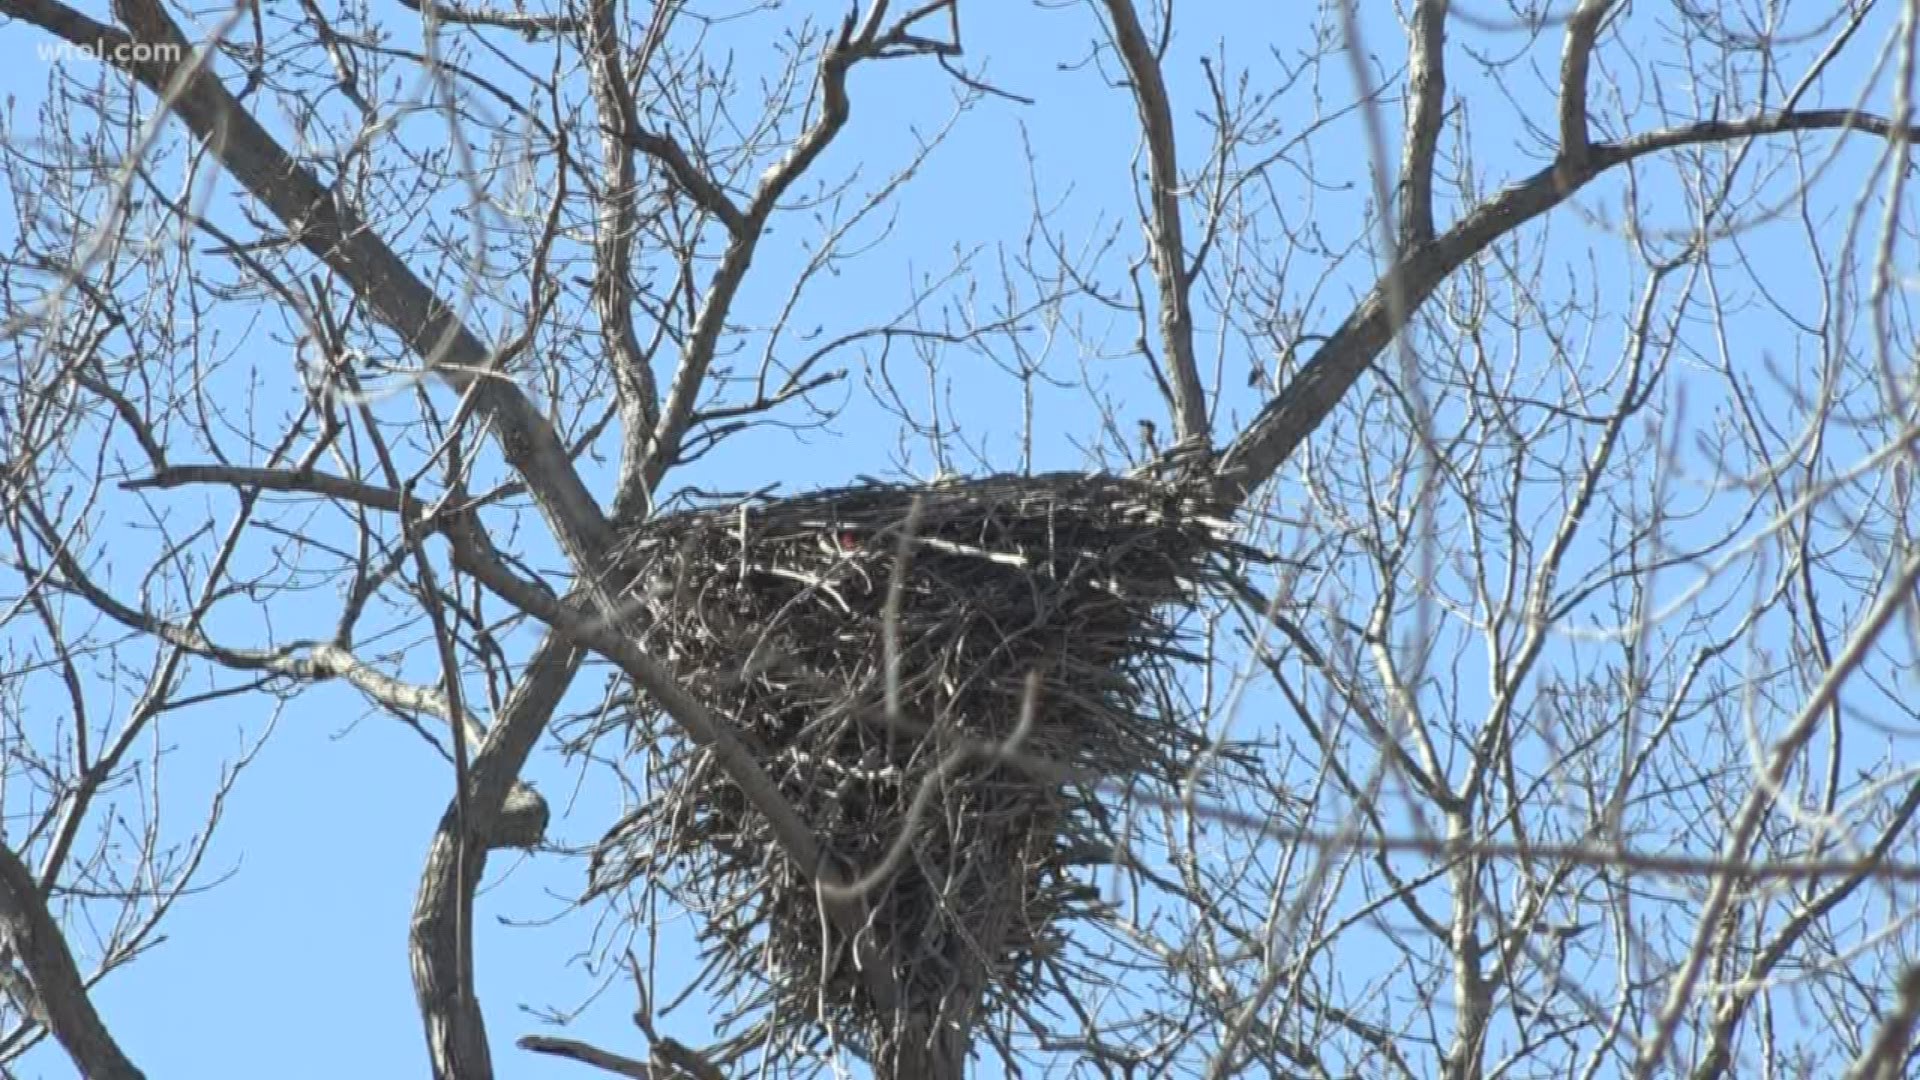 Statewide search to locate all bald eagle nests in Ohio